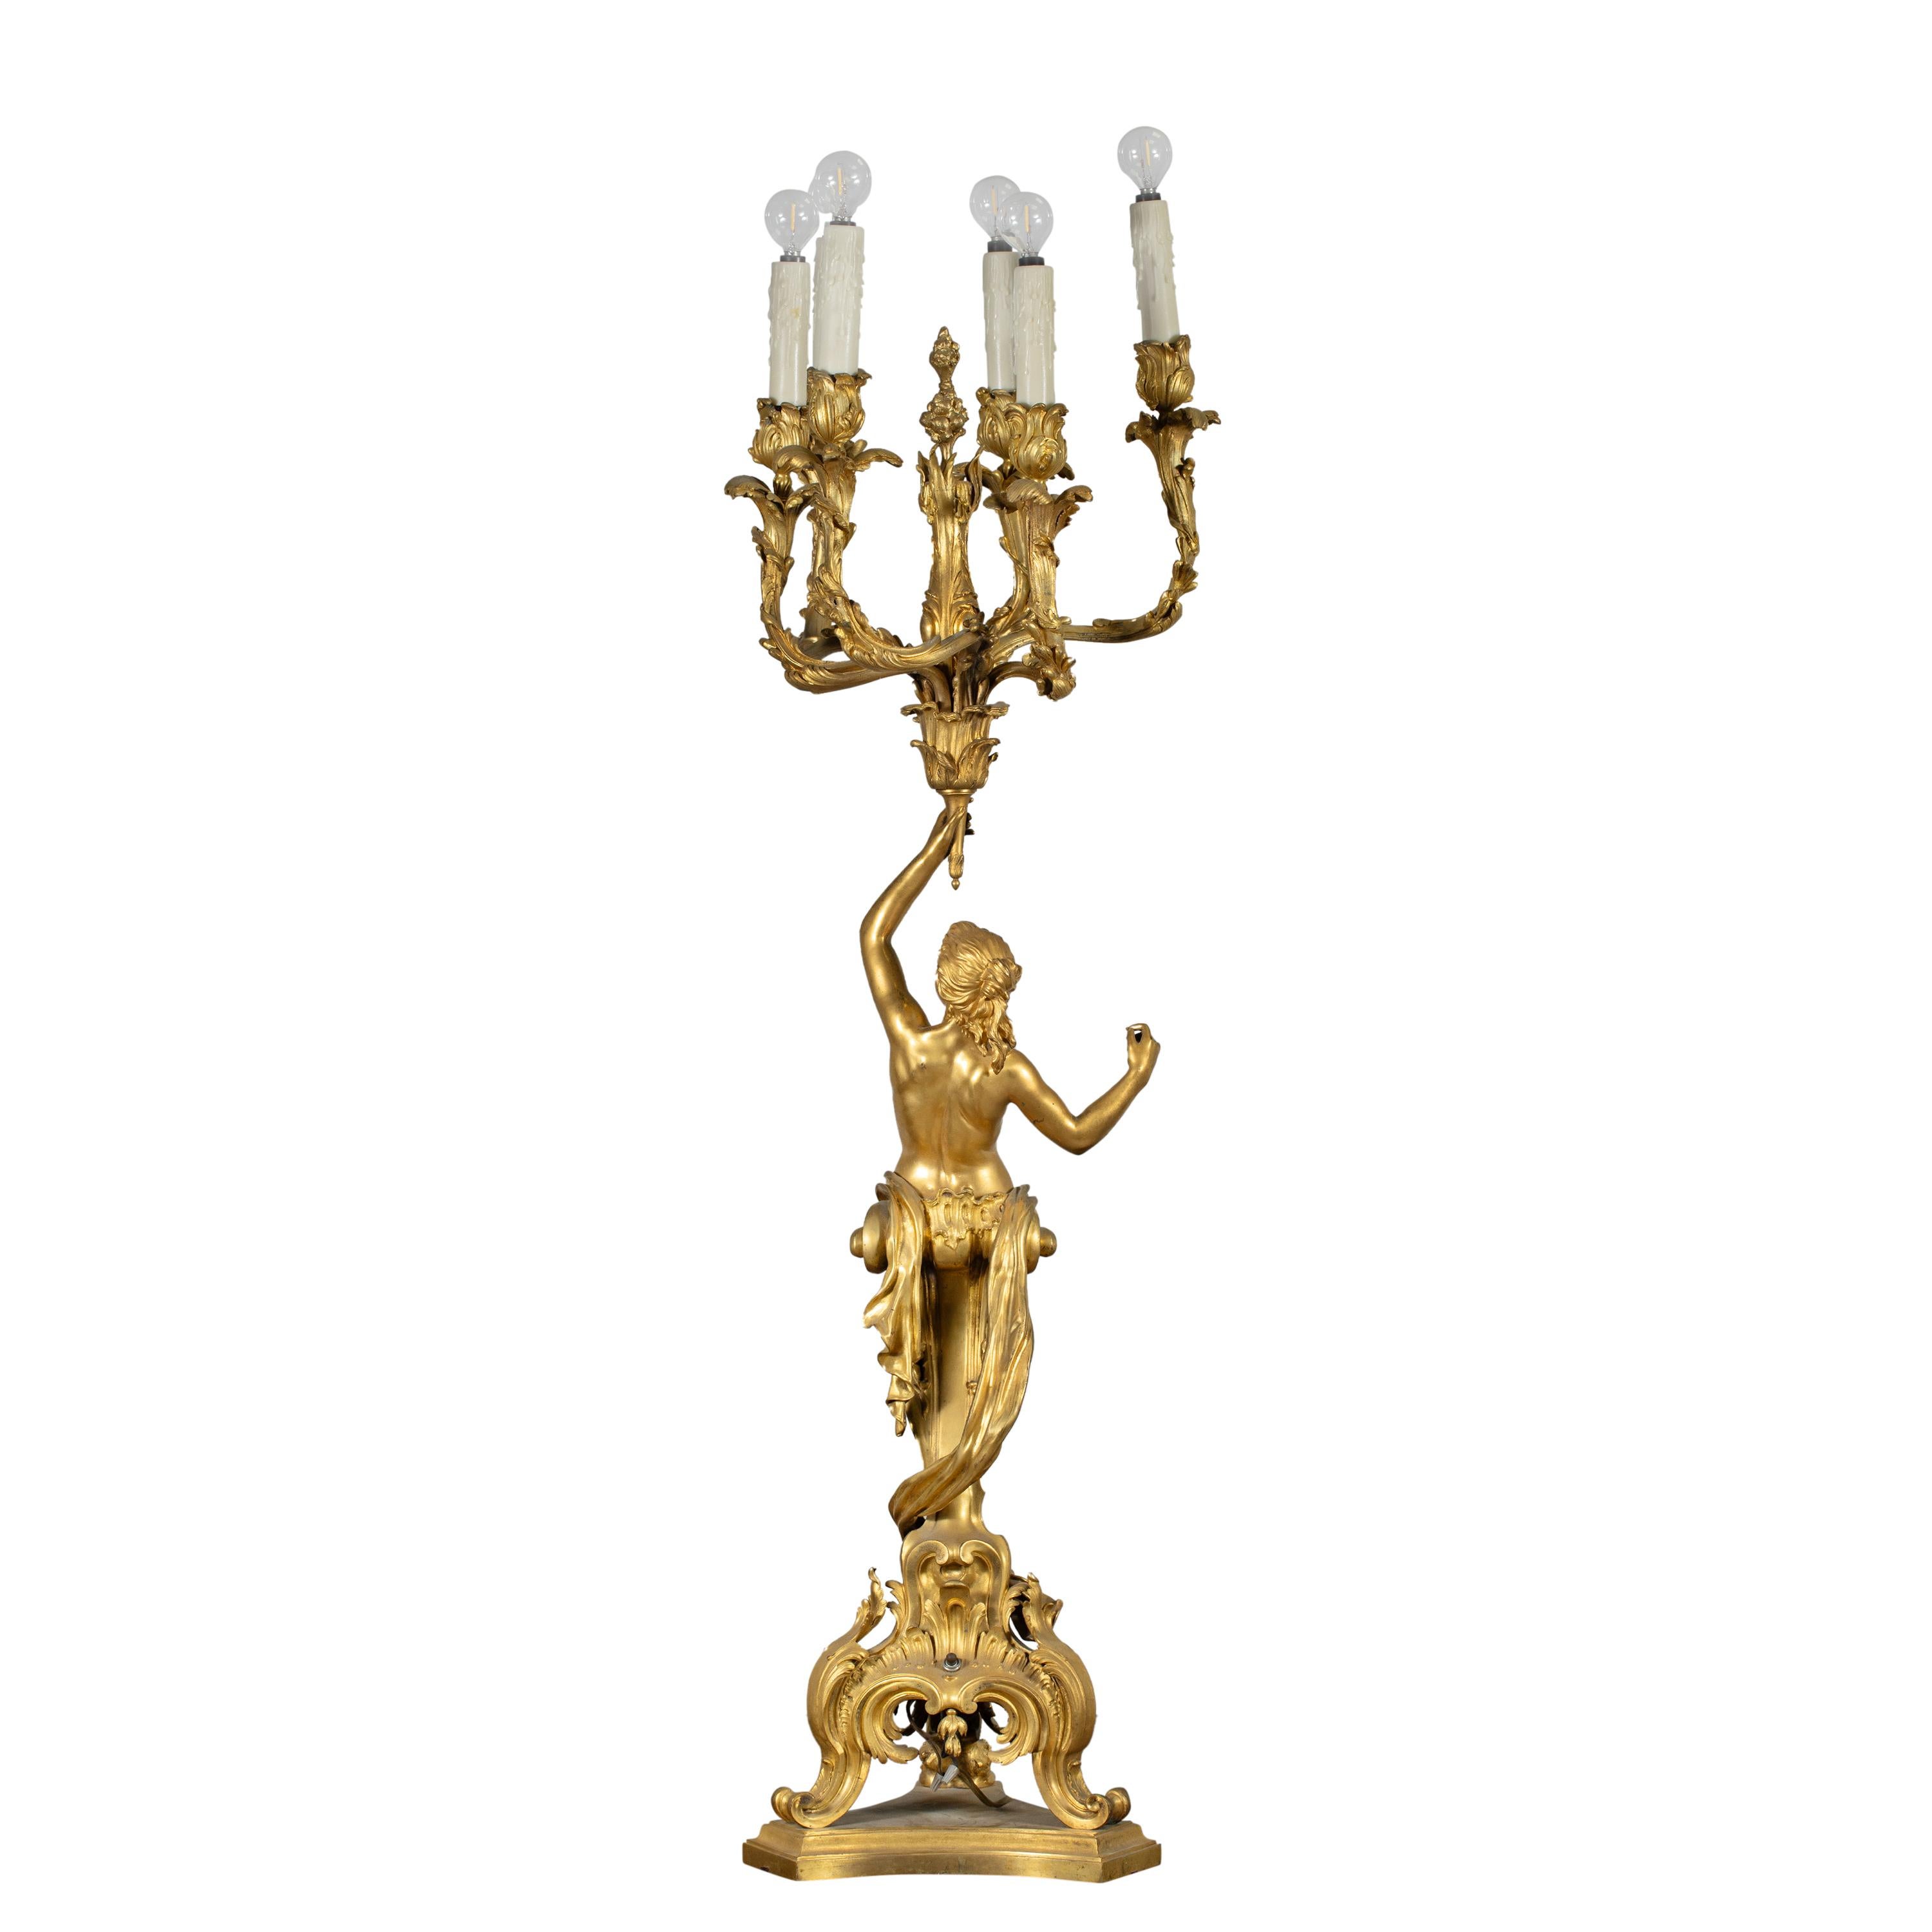 A Large French Gilt-Bronze Centerpiece Candelabra After Clodion, 19th Century In Excellent Condition For Sale In Los Angeles, CA